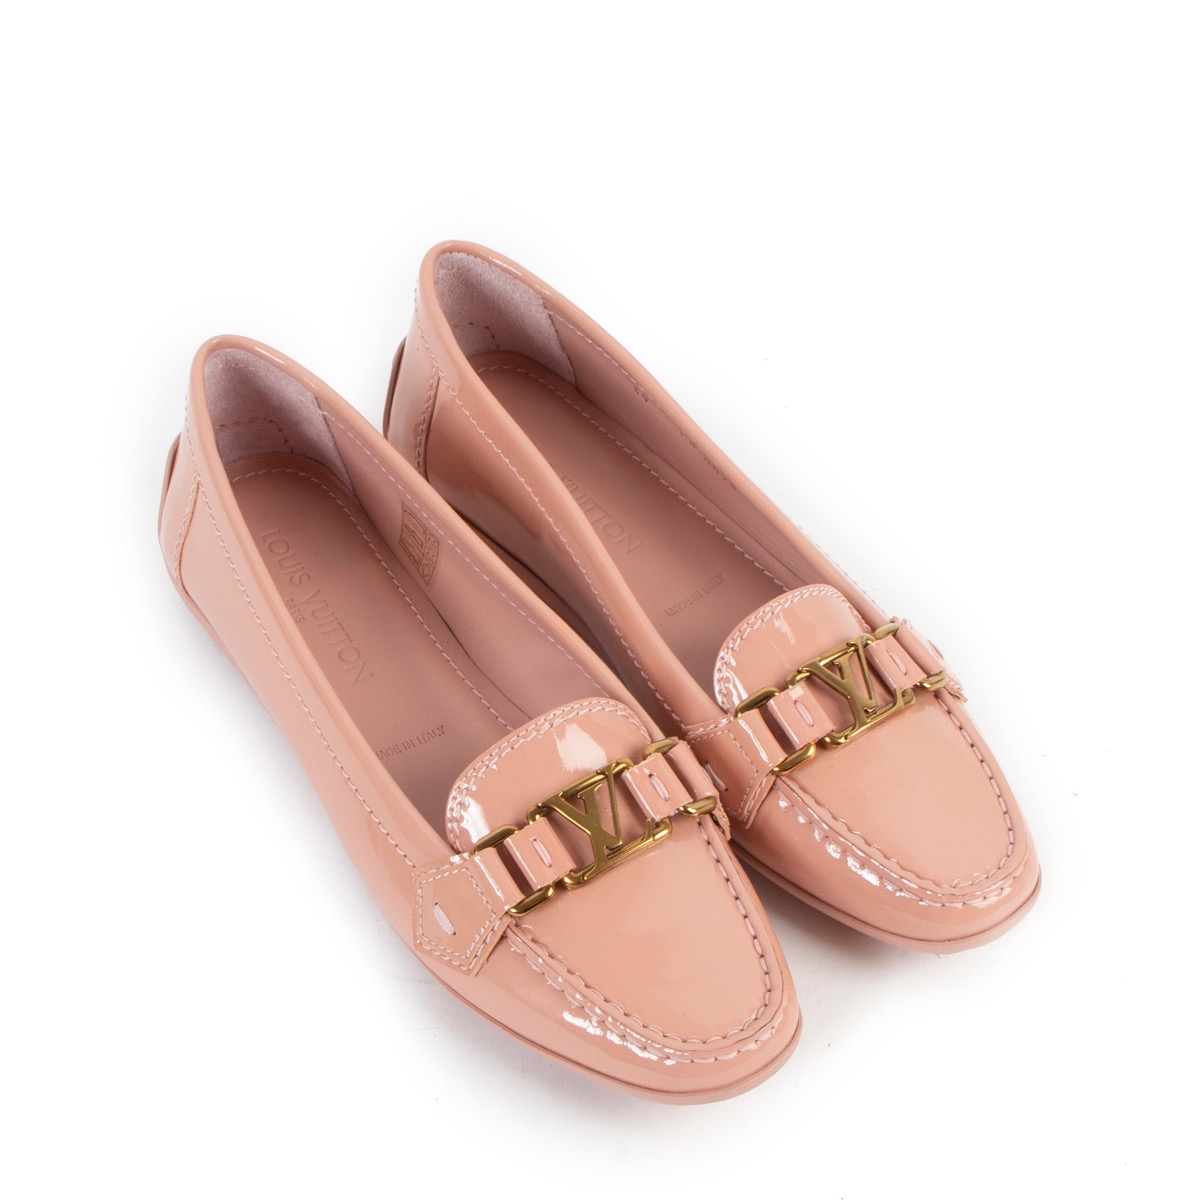 Leather sandals Louis Vuitton Pink size 39 EU in Leather - 25525118